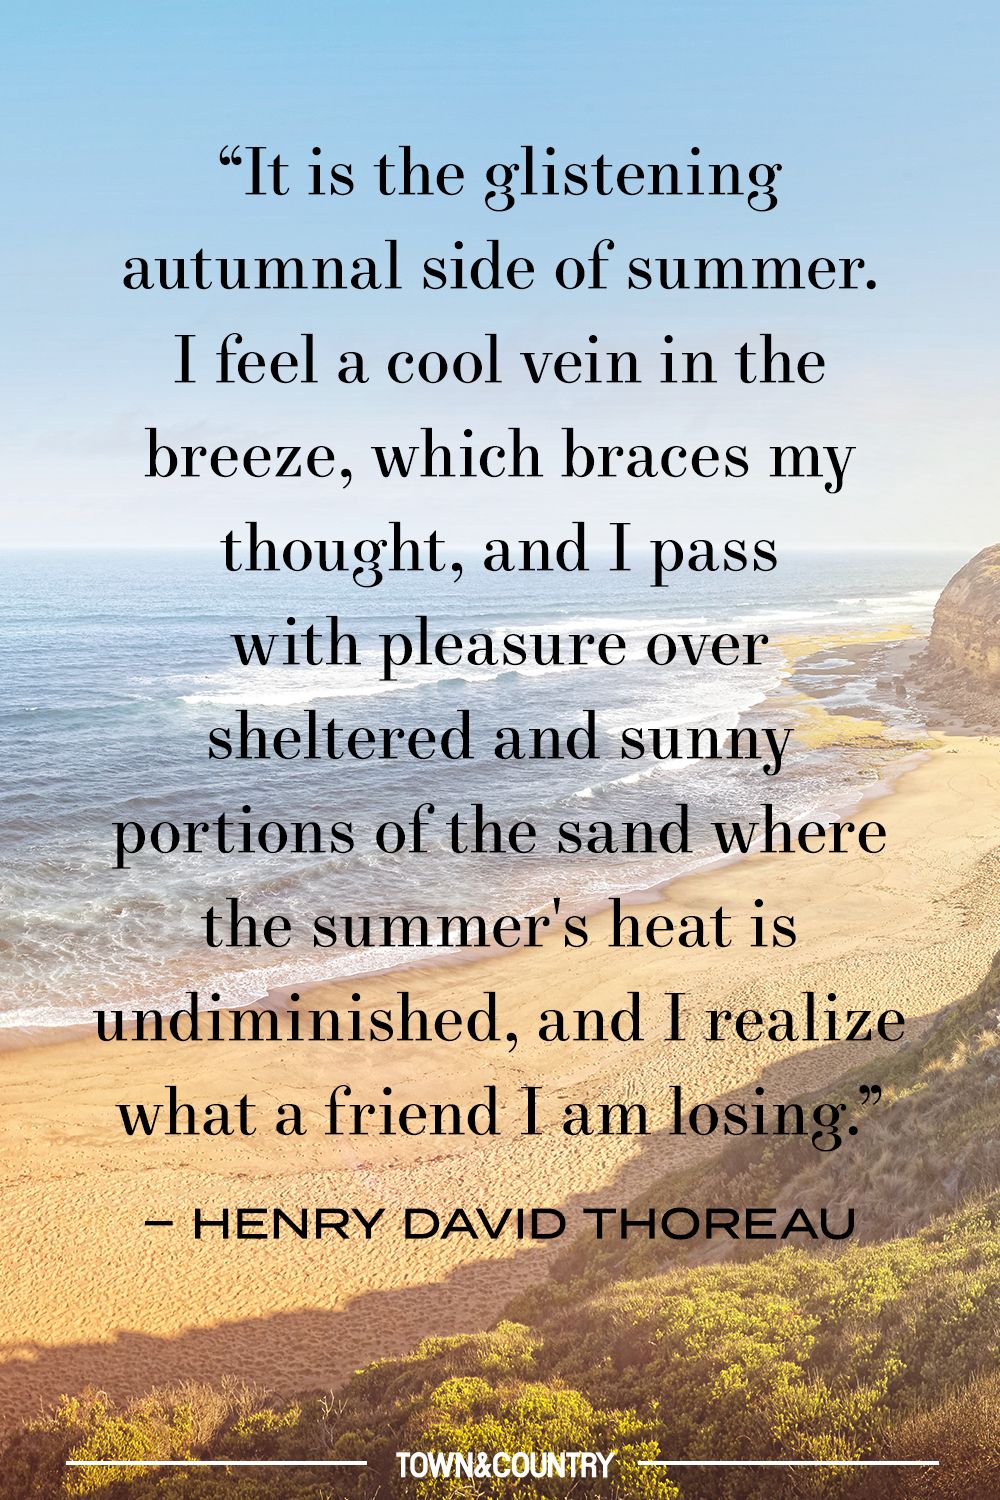 Best End of Summer Quotes Quotes About the Last Days of Summer